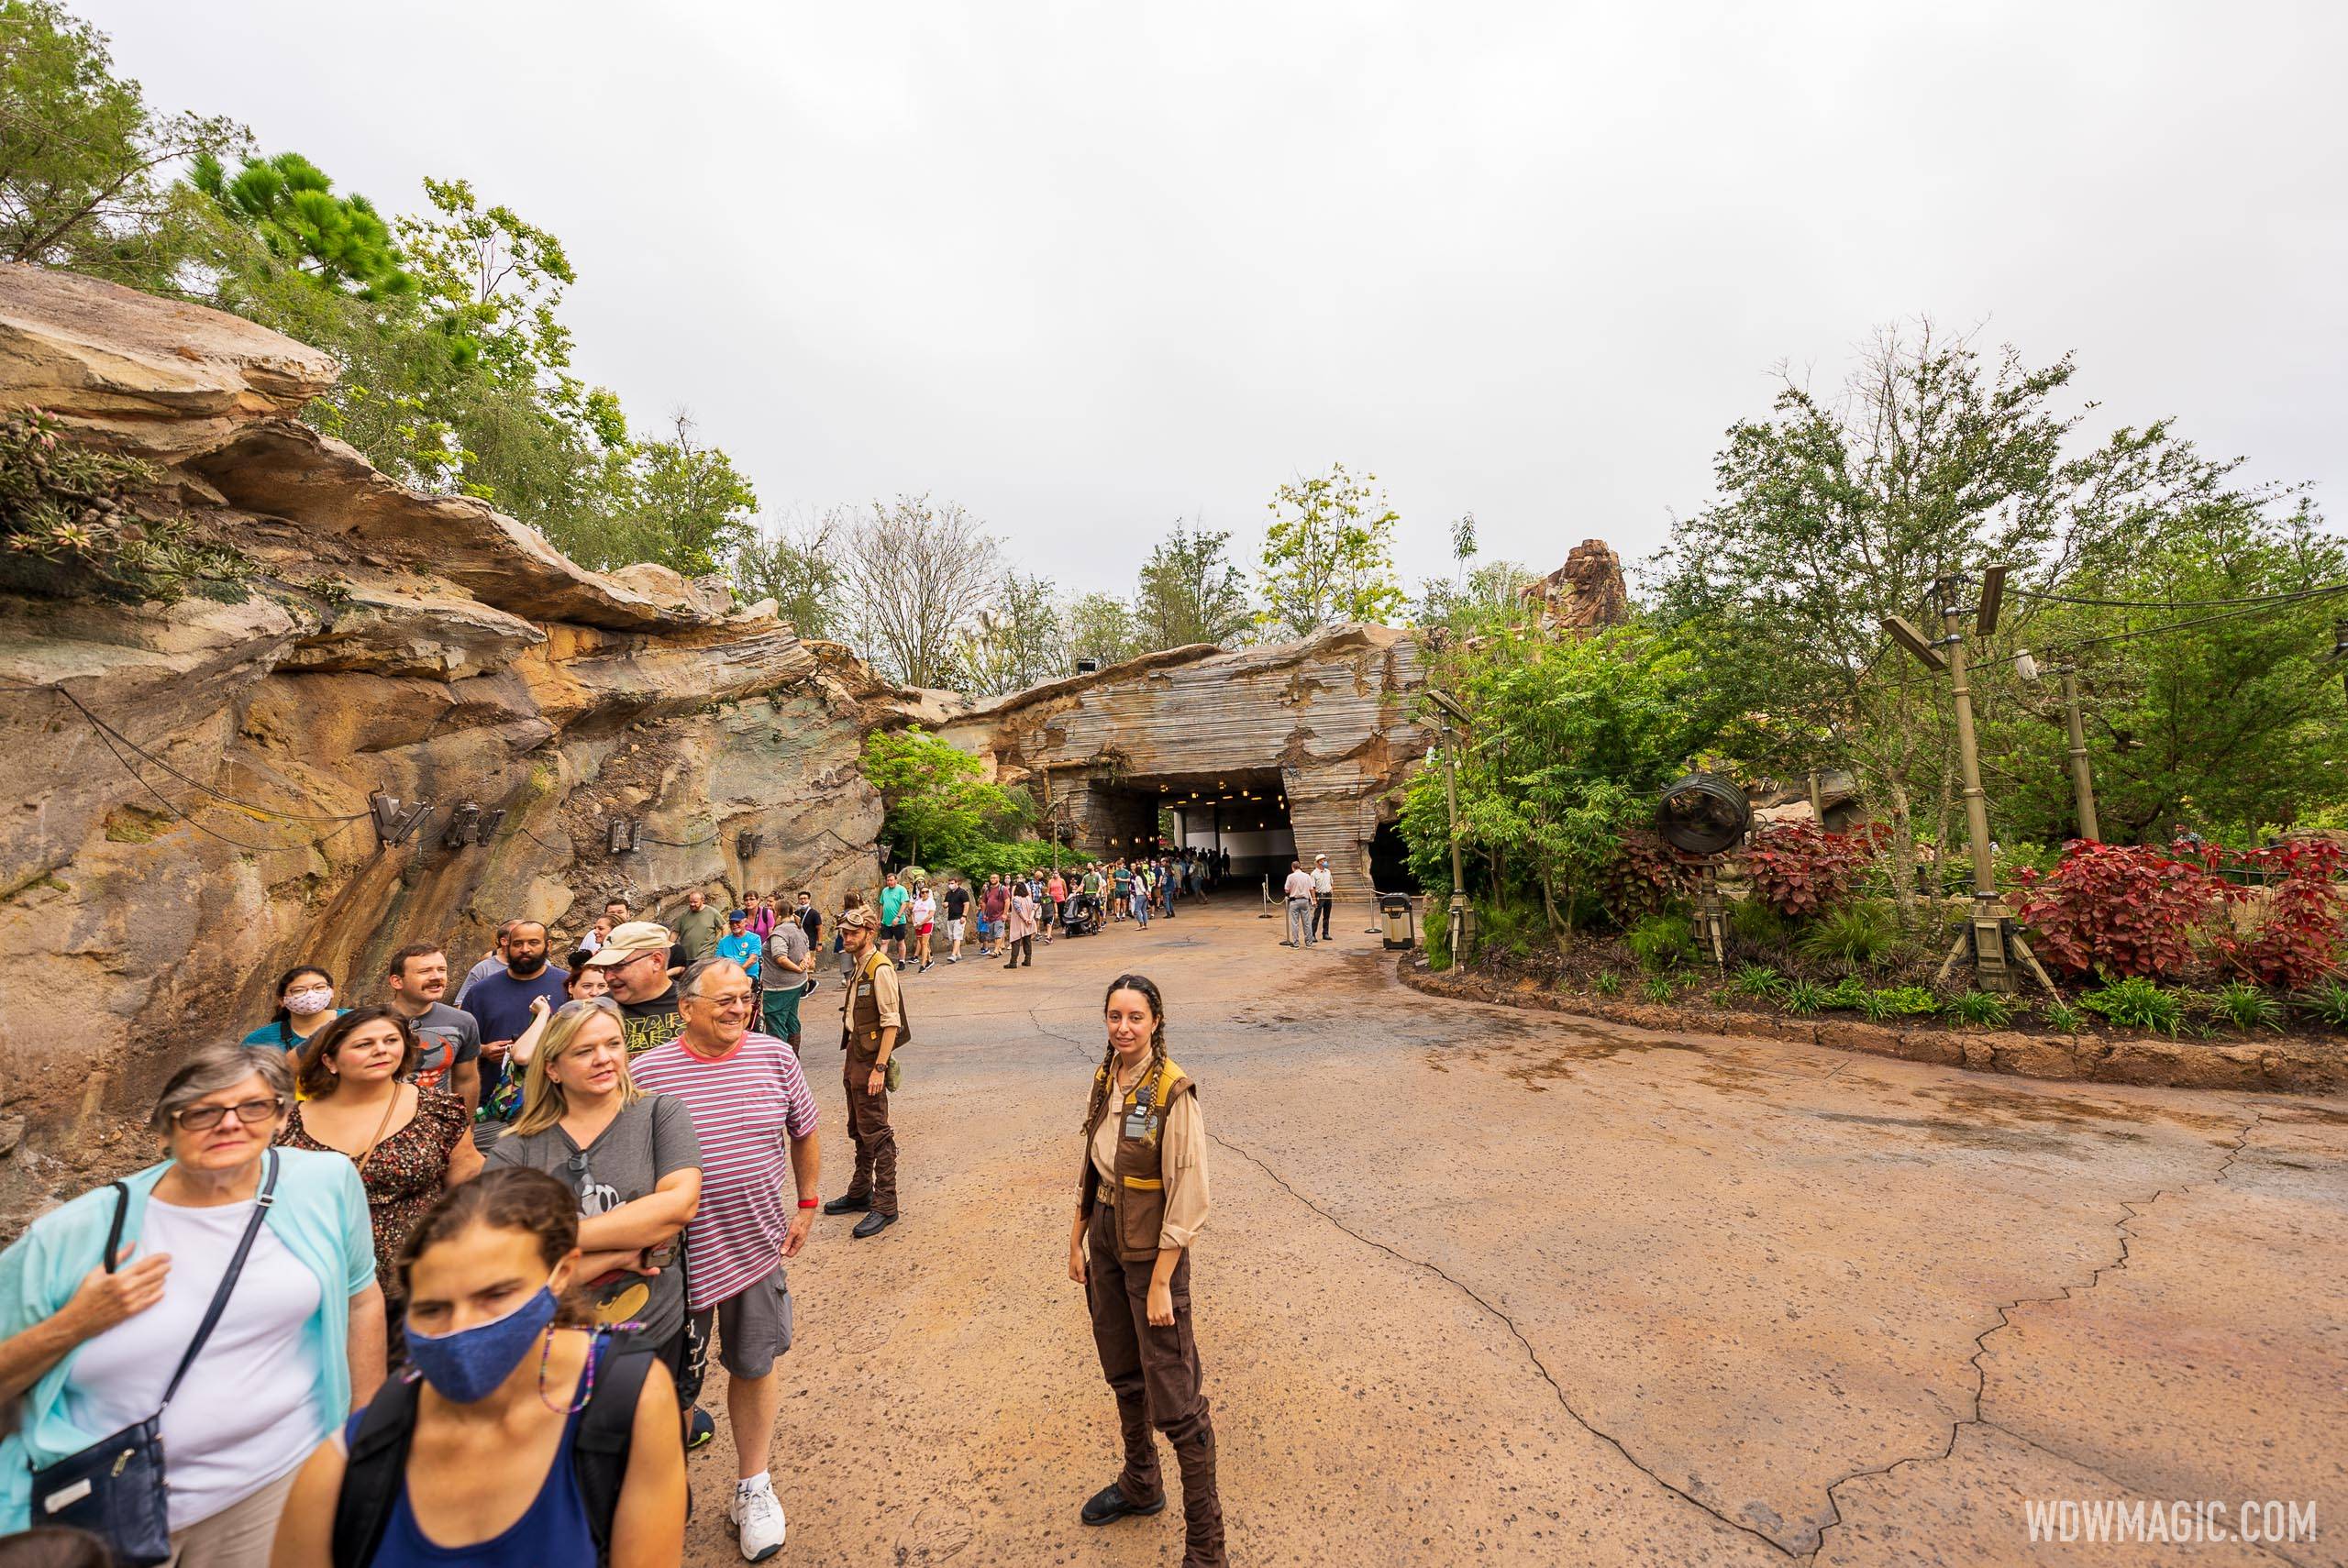 Star Wars Rise of the Resistance first day of standby queue operation